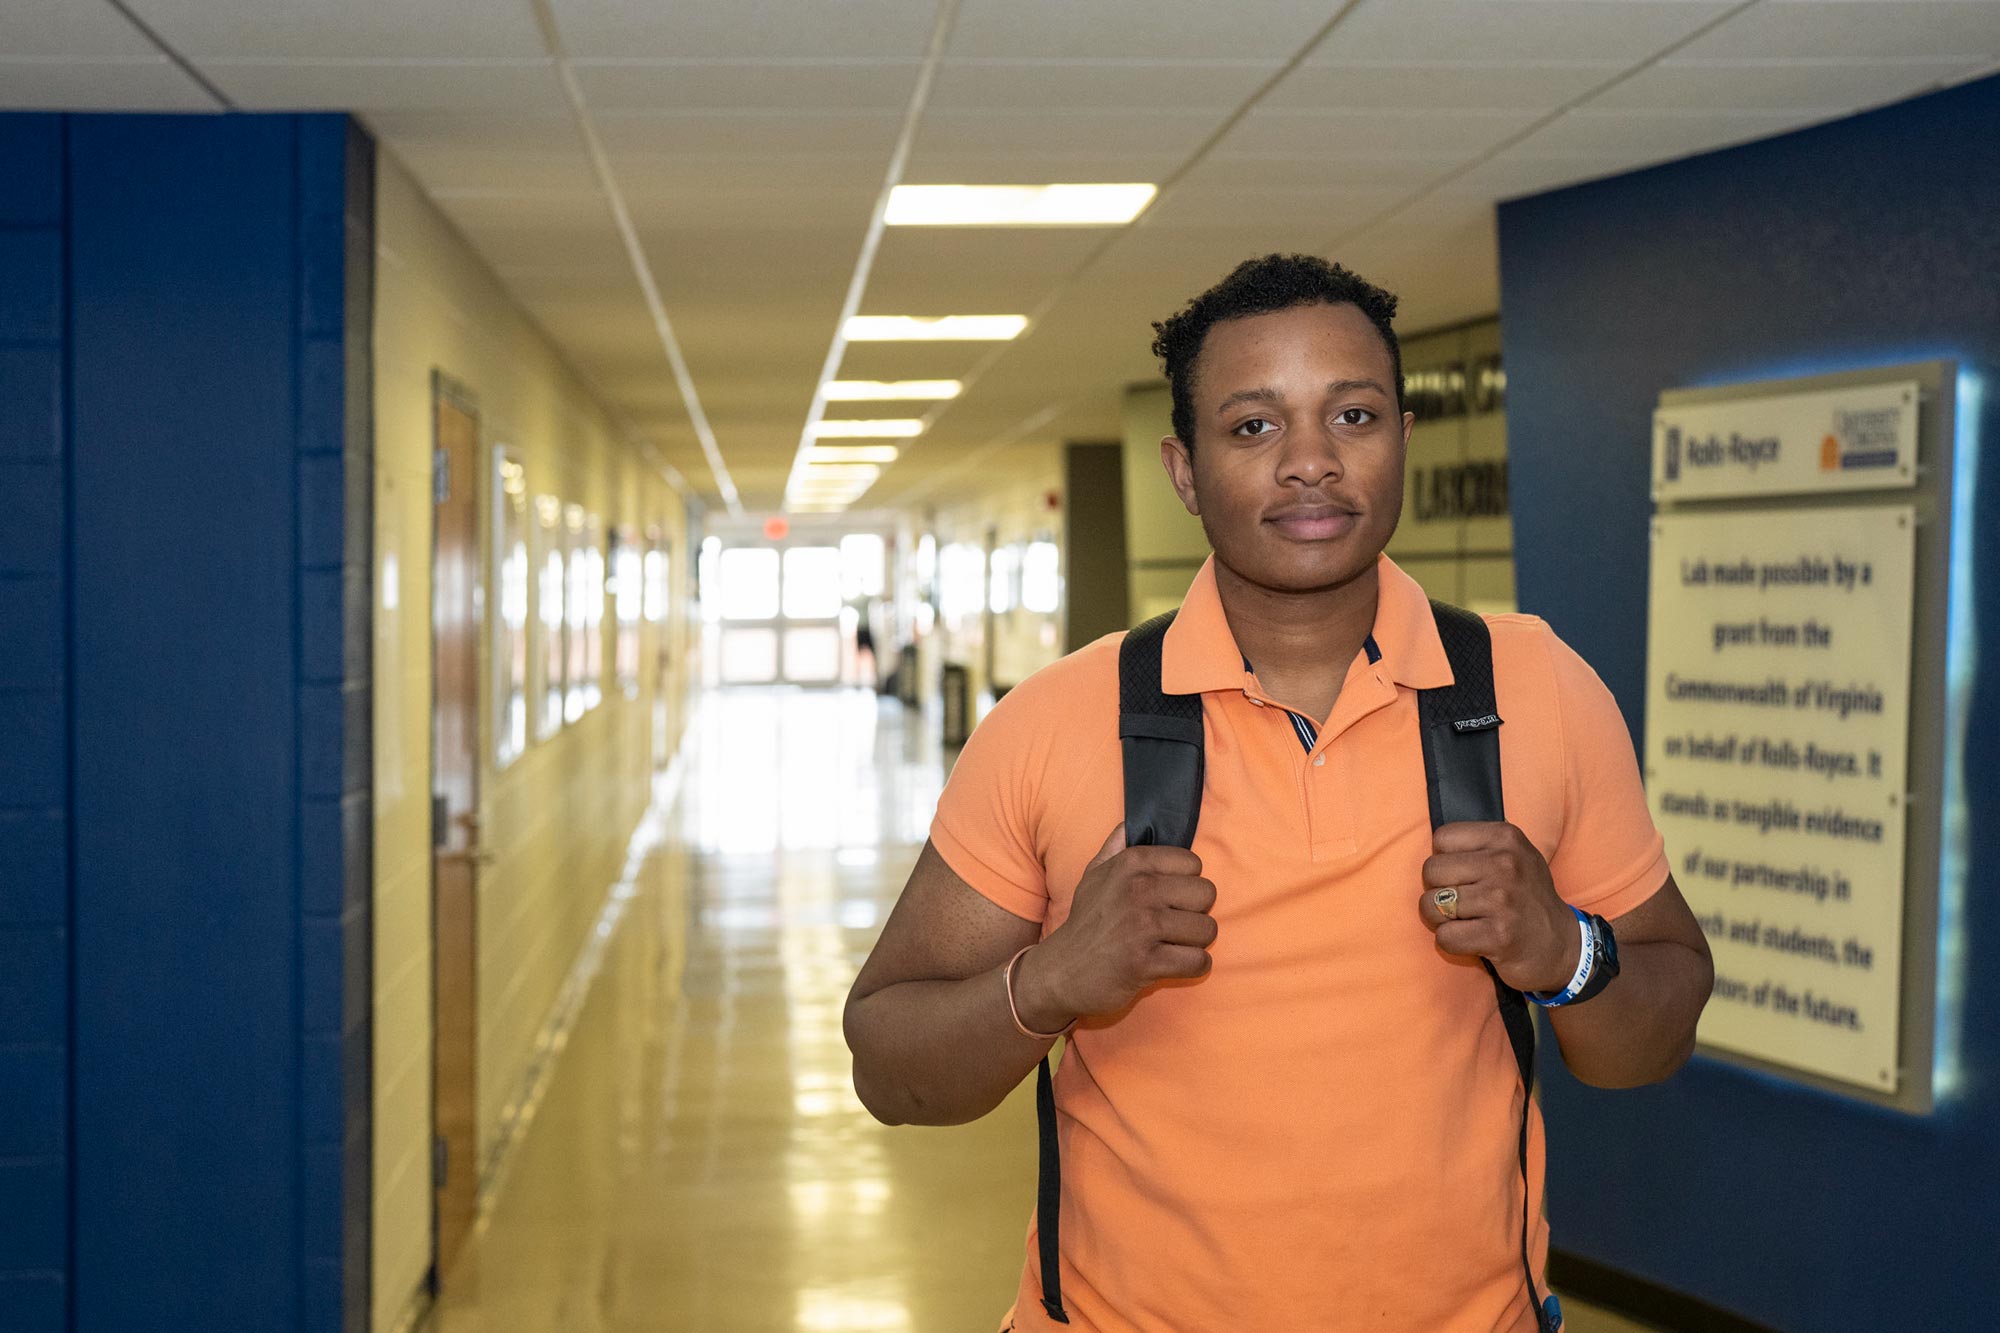 Joshua Franklin, wearing a backpack, poses for a portrait in a hallway.